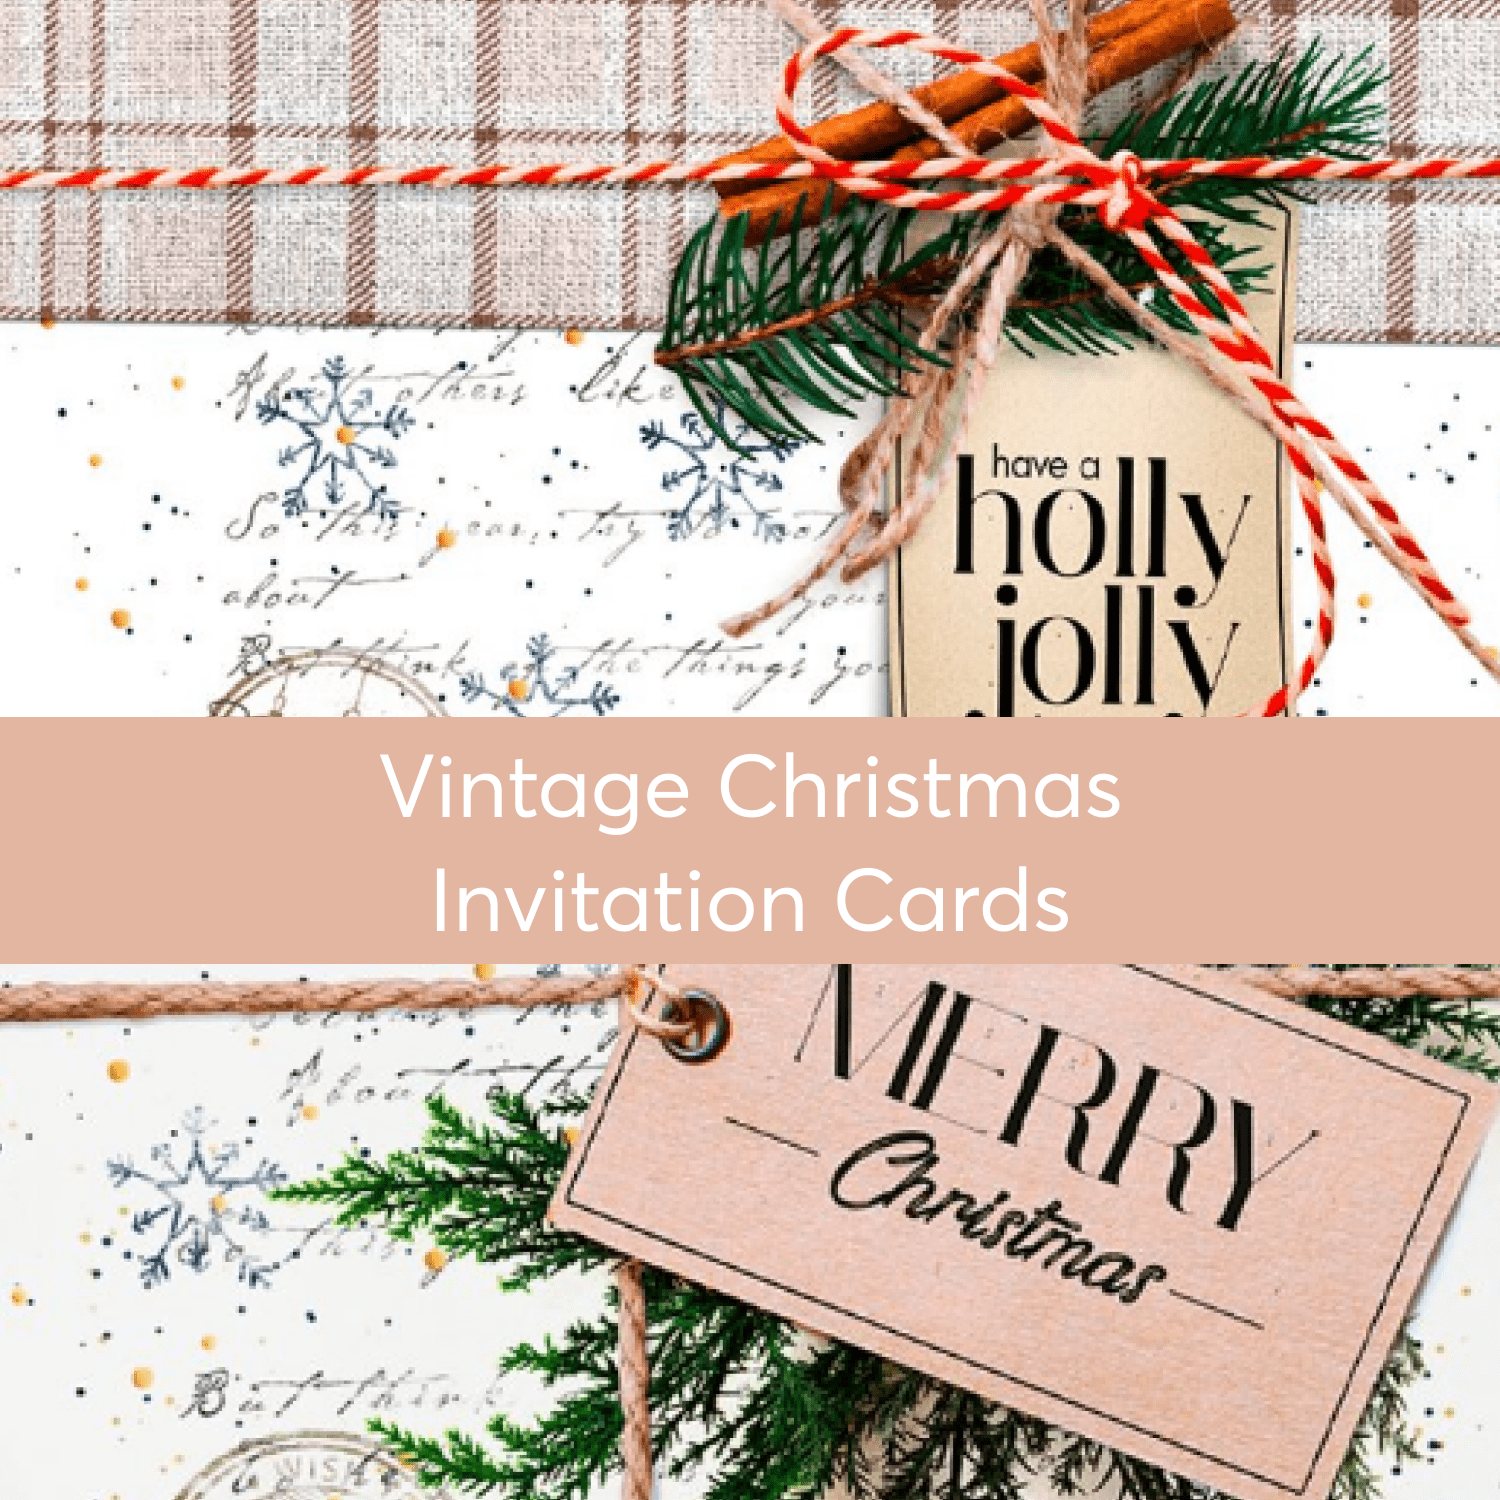 Vintage Christmas Invitation Cards preview 1500x1500 1